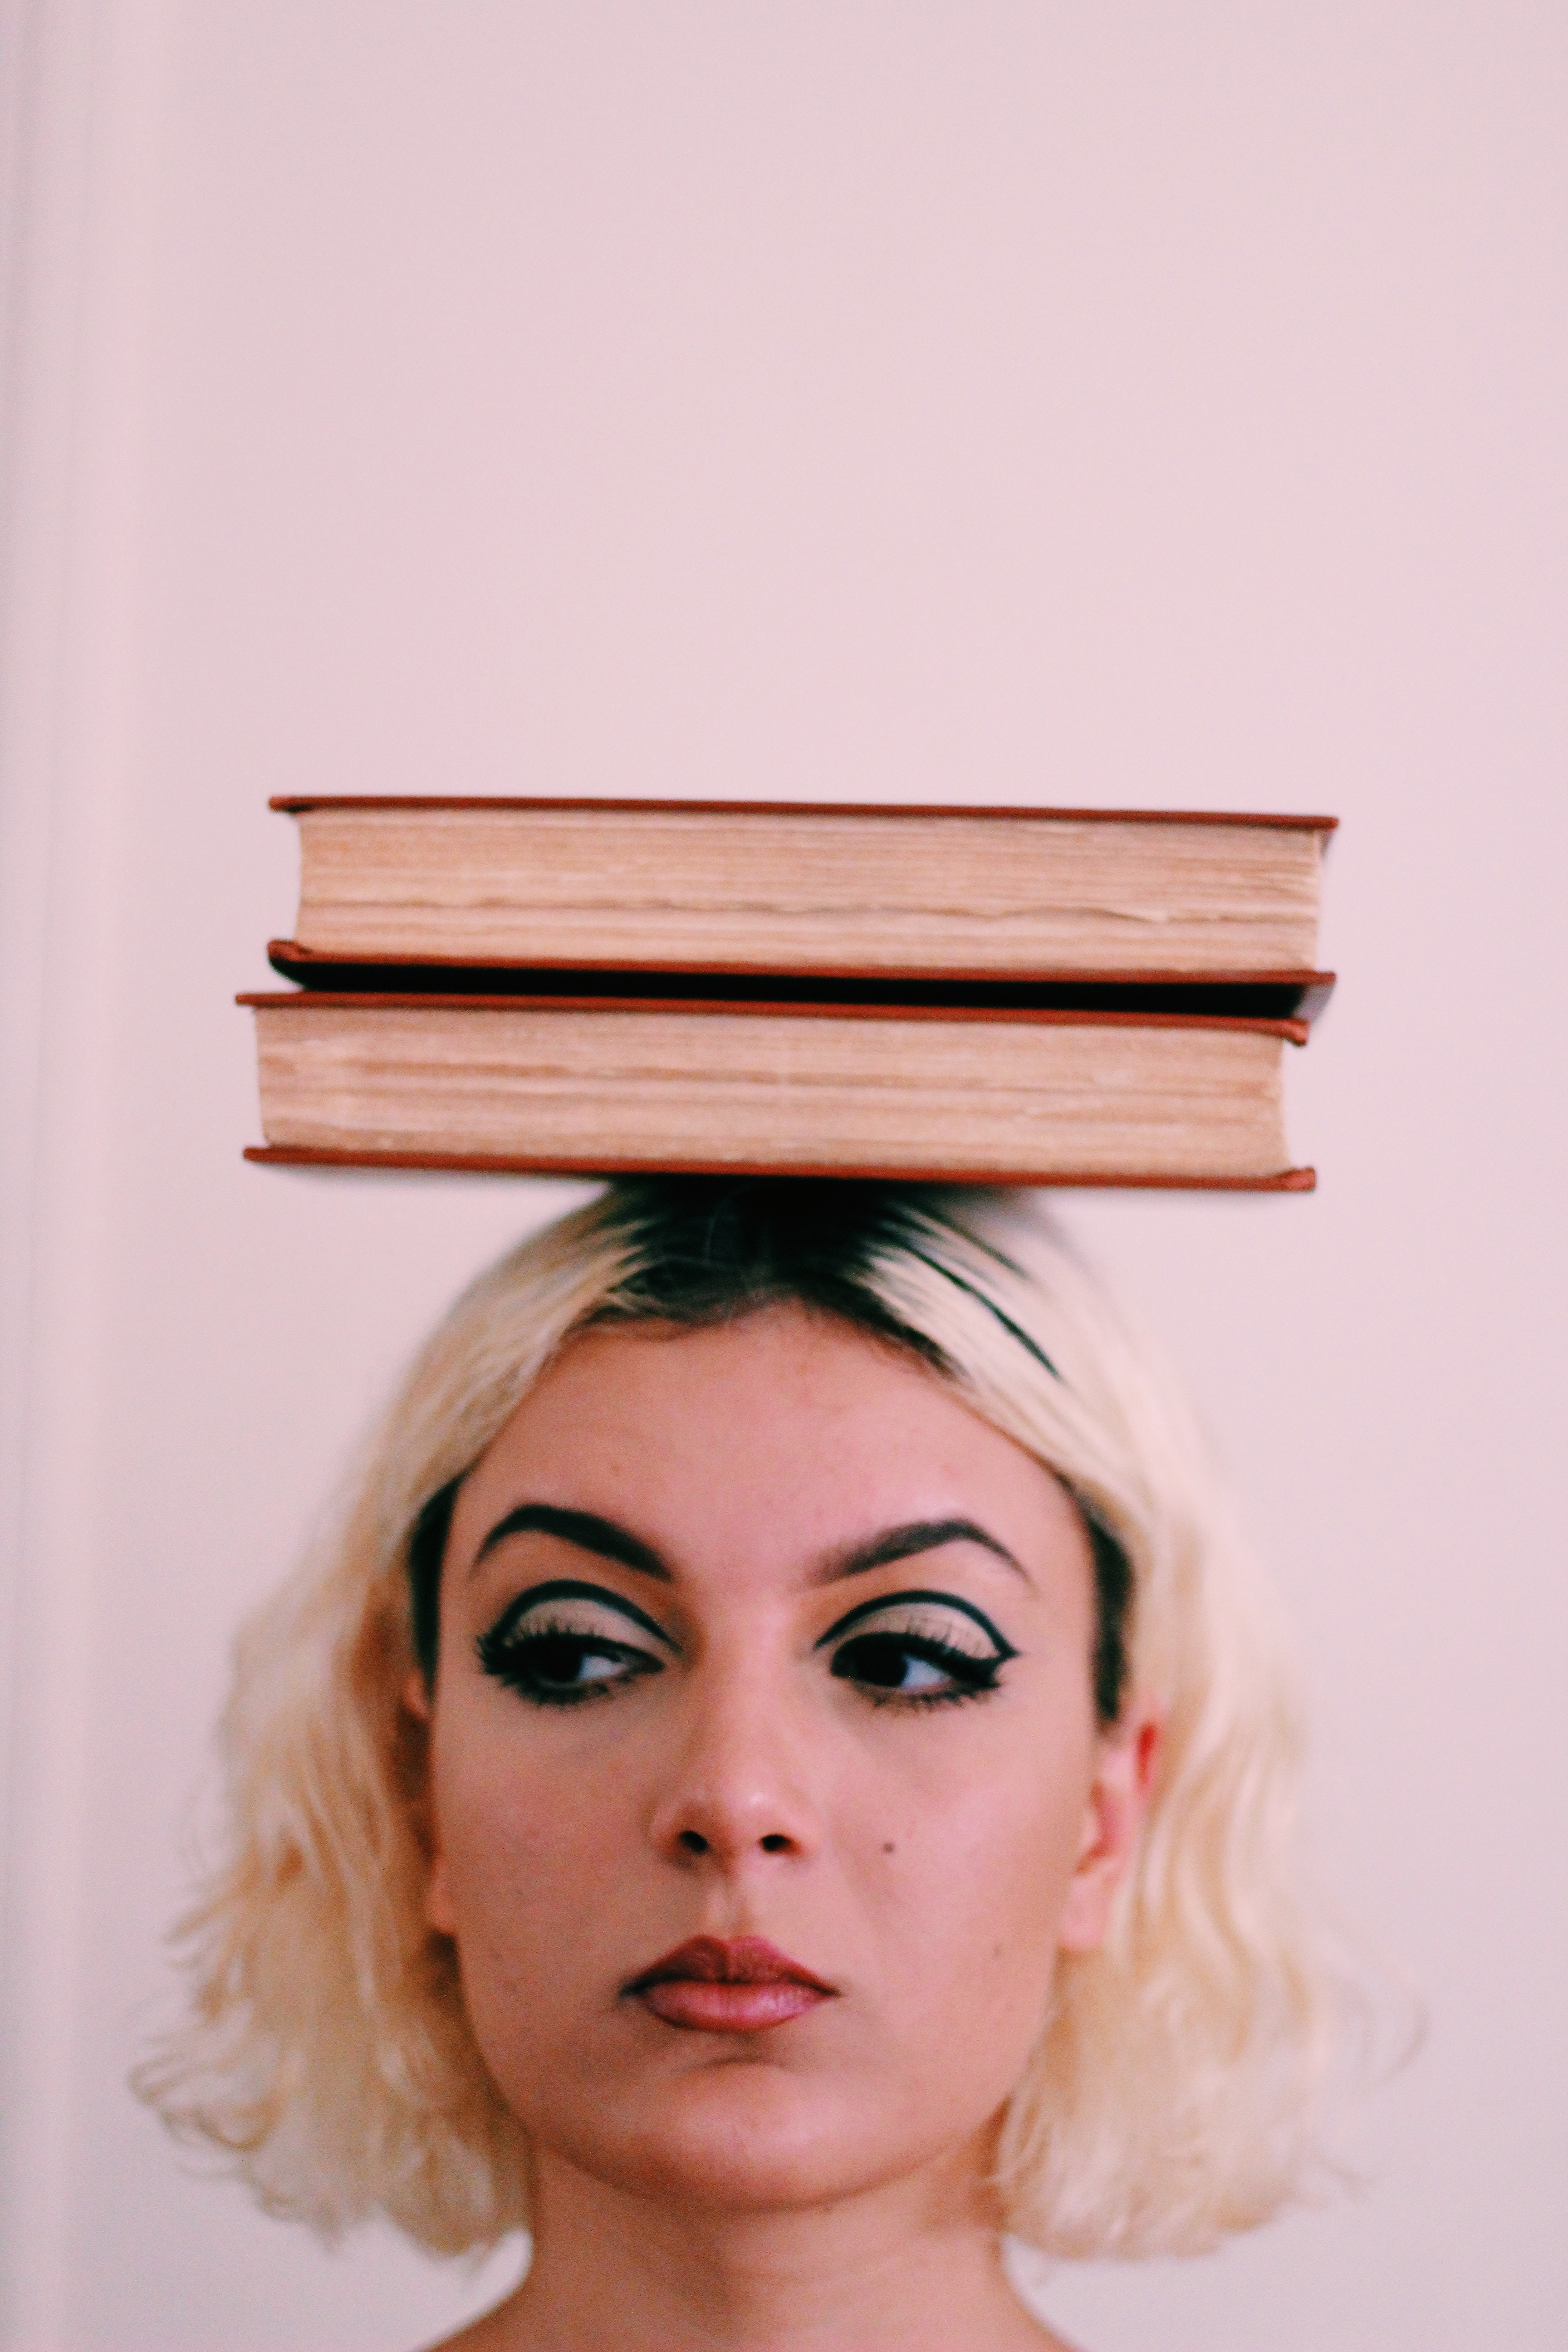 A woman balancing books on her head. | Source: Pexels